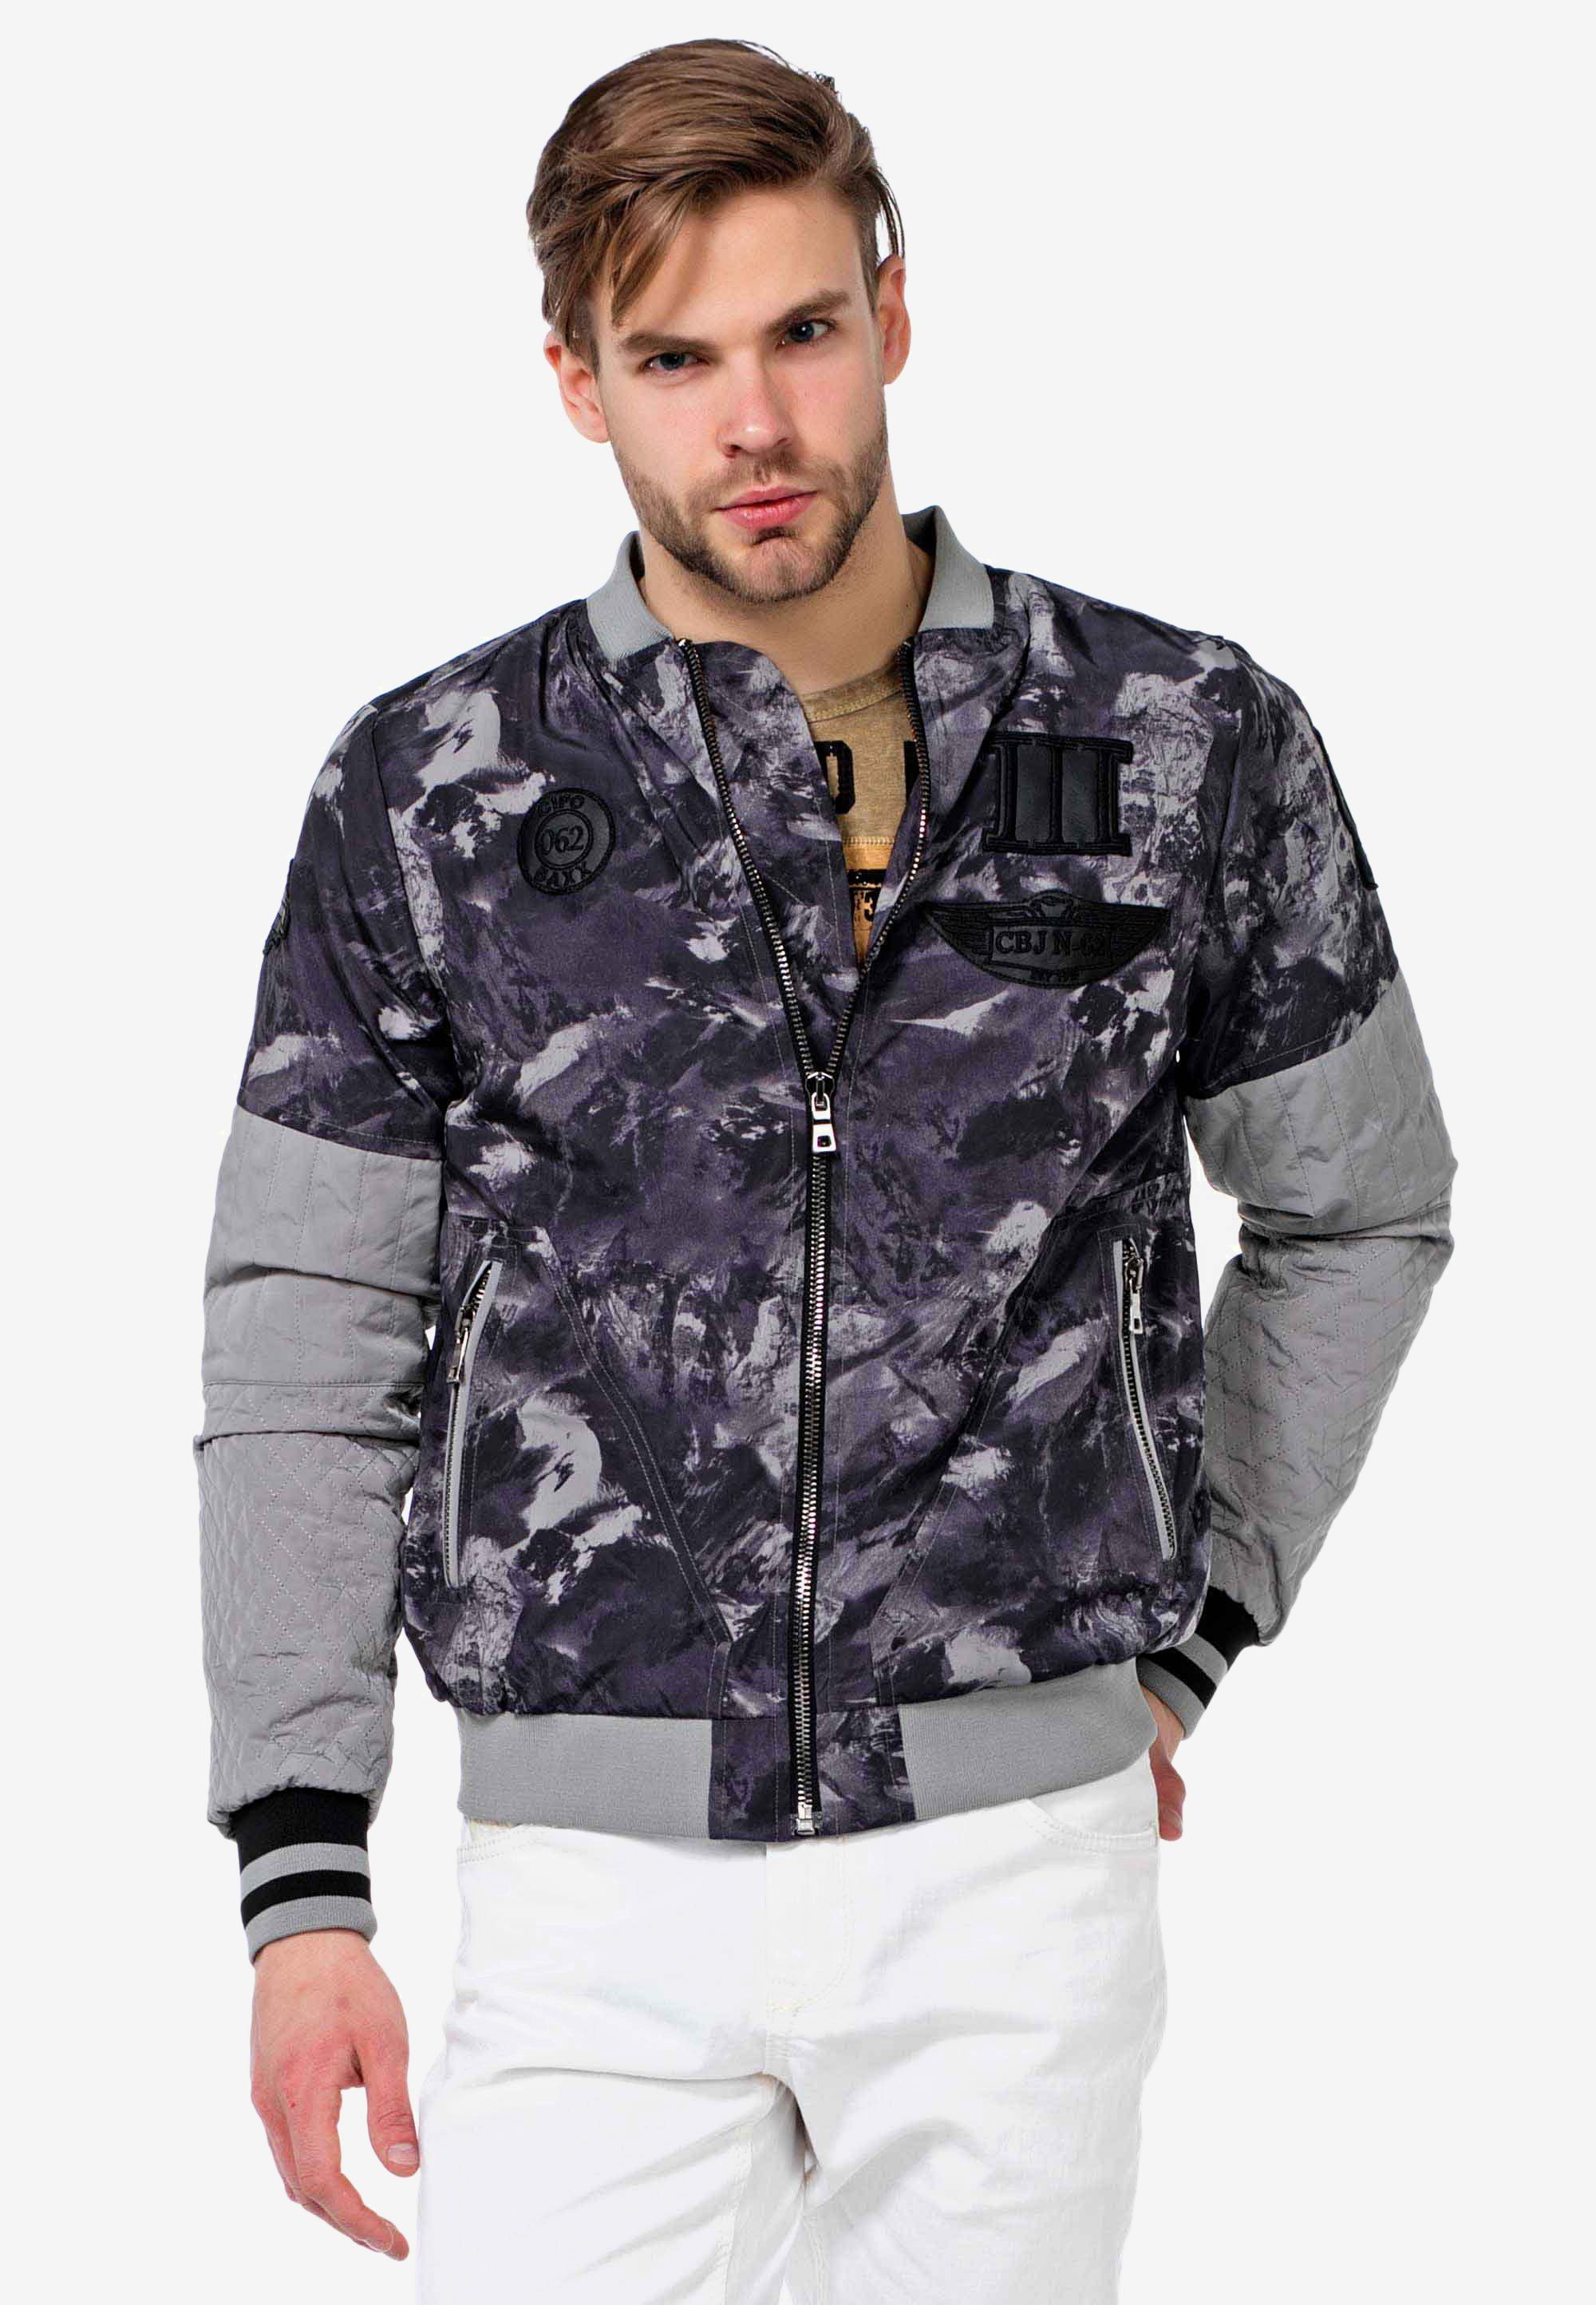 Cipo & Baxx Collegejacke in coolem Military-Style grau